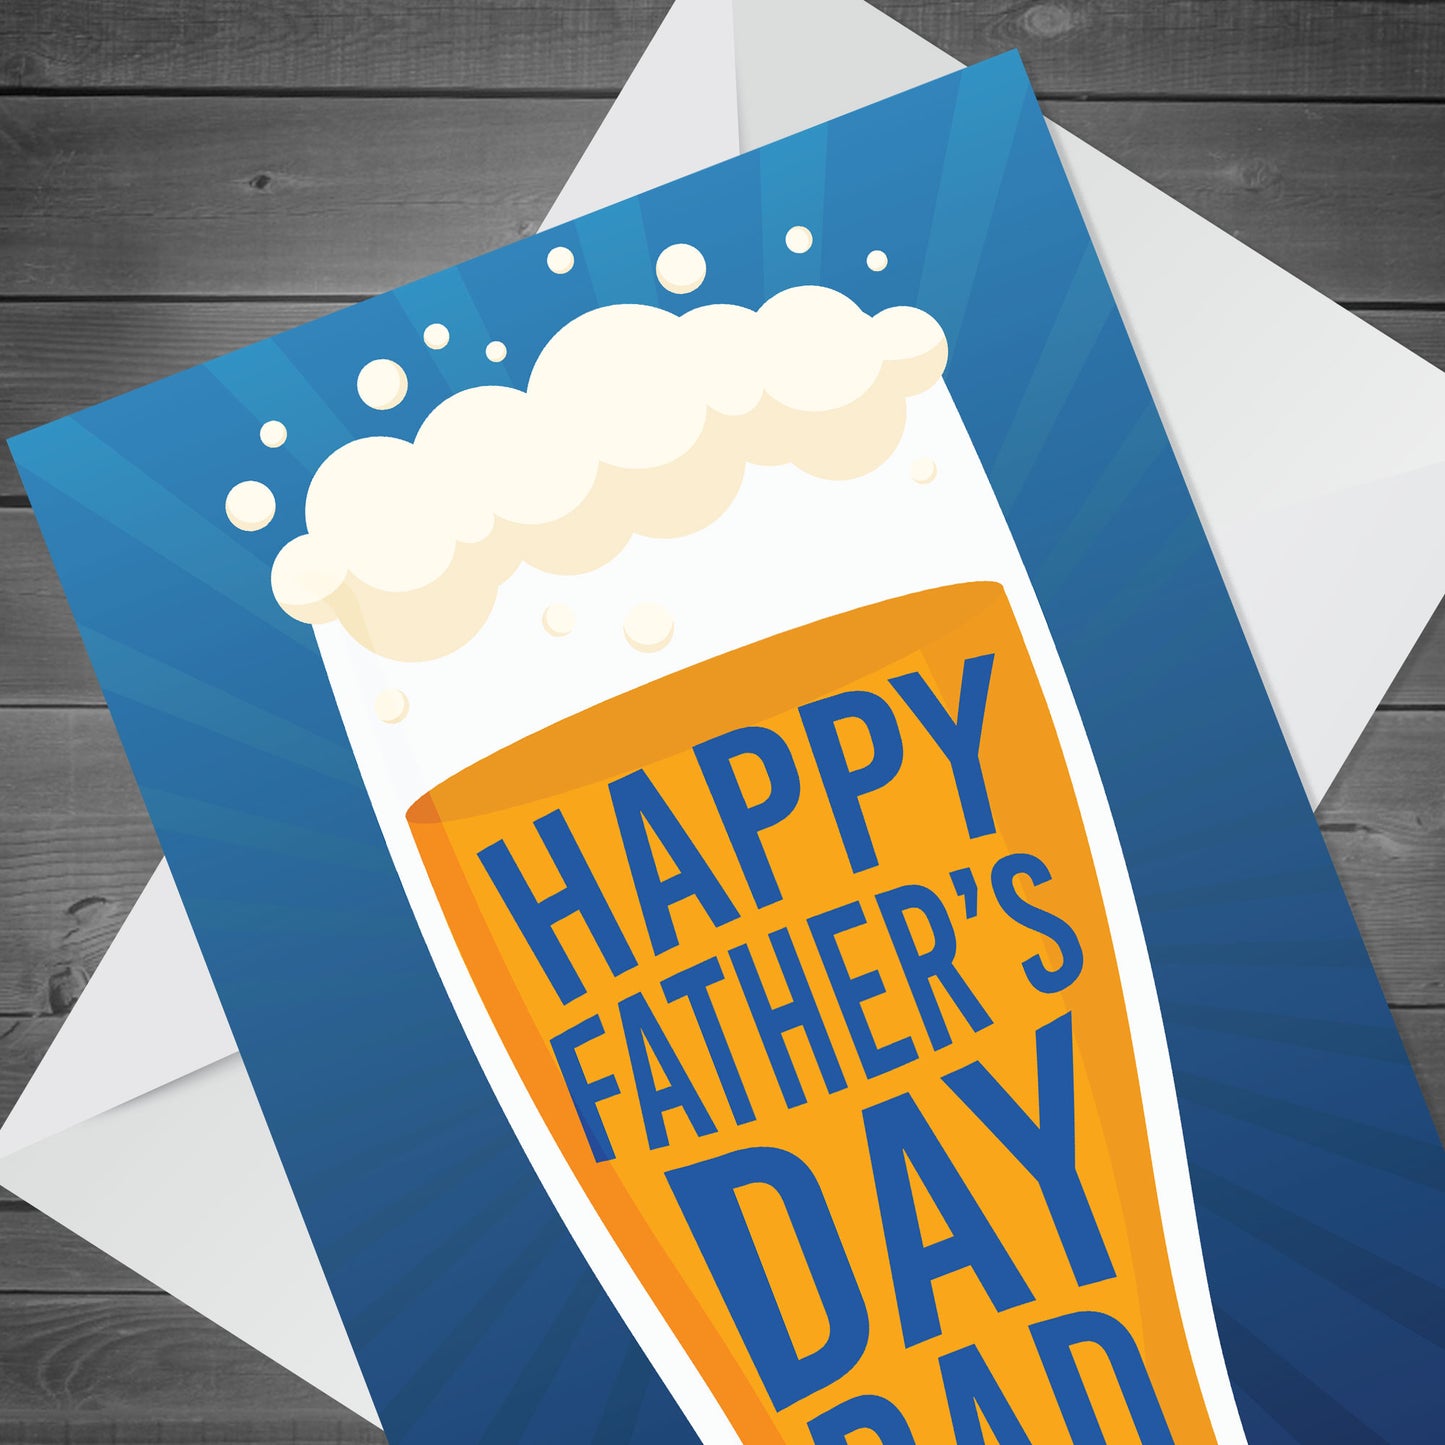 Happy Fathers Day Card For Dad Novelty Funny Dad Card